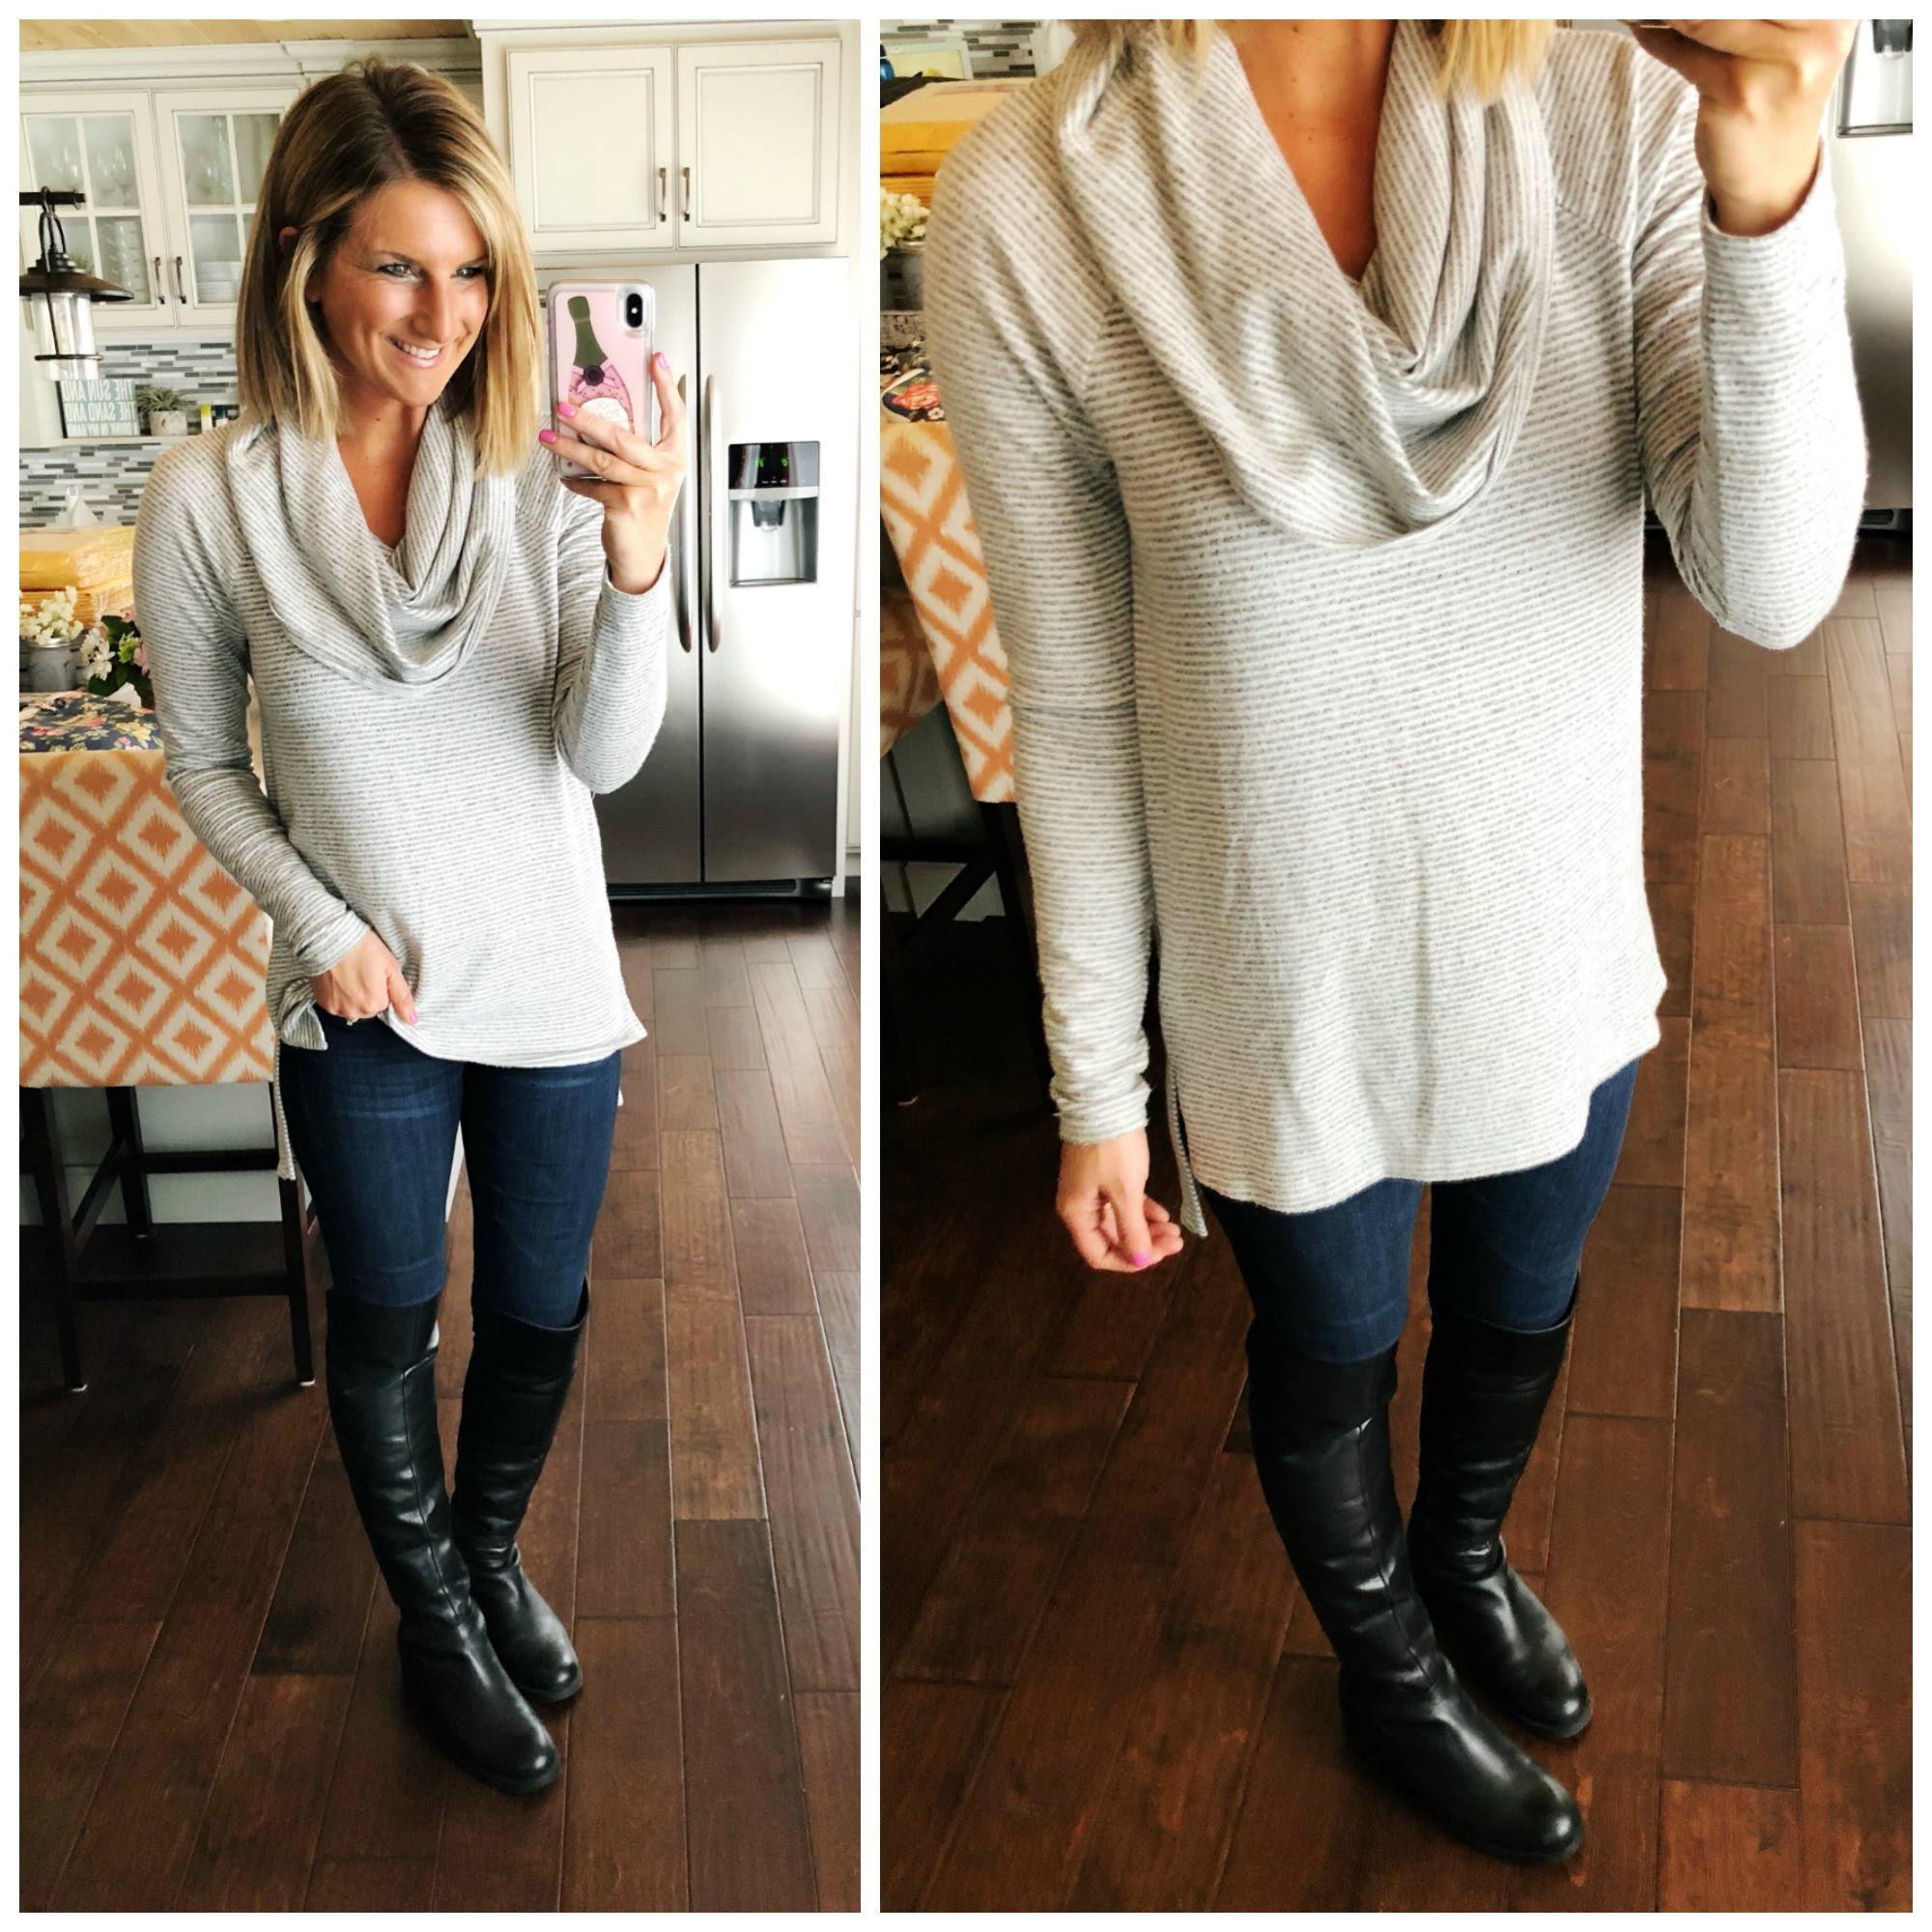 How to Wear a Convertible Neckline Top // Grey Striped Tunic + Jeggings + Knee High Black Boots